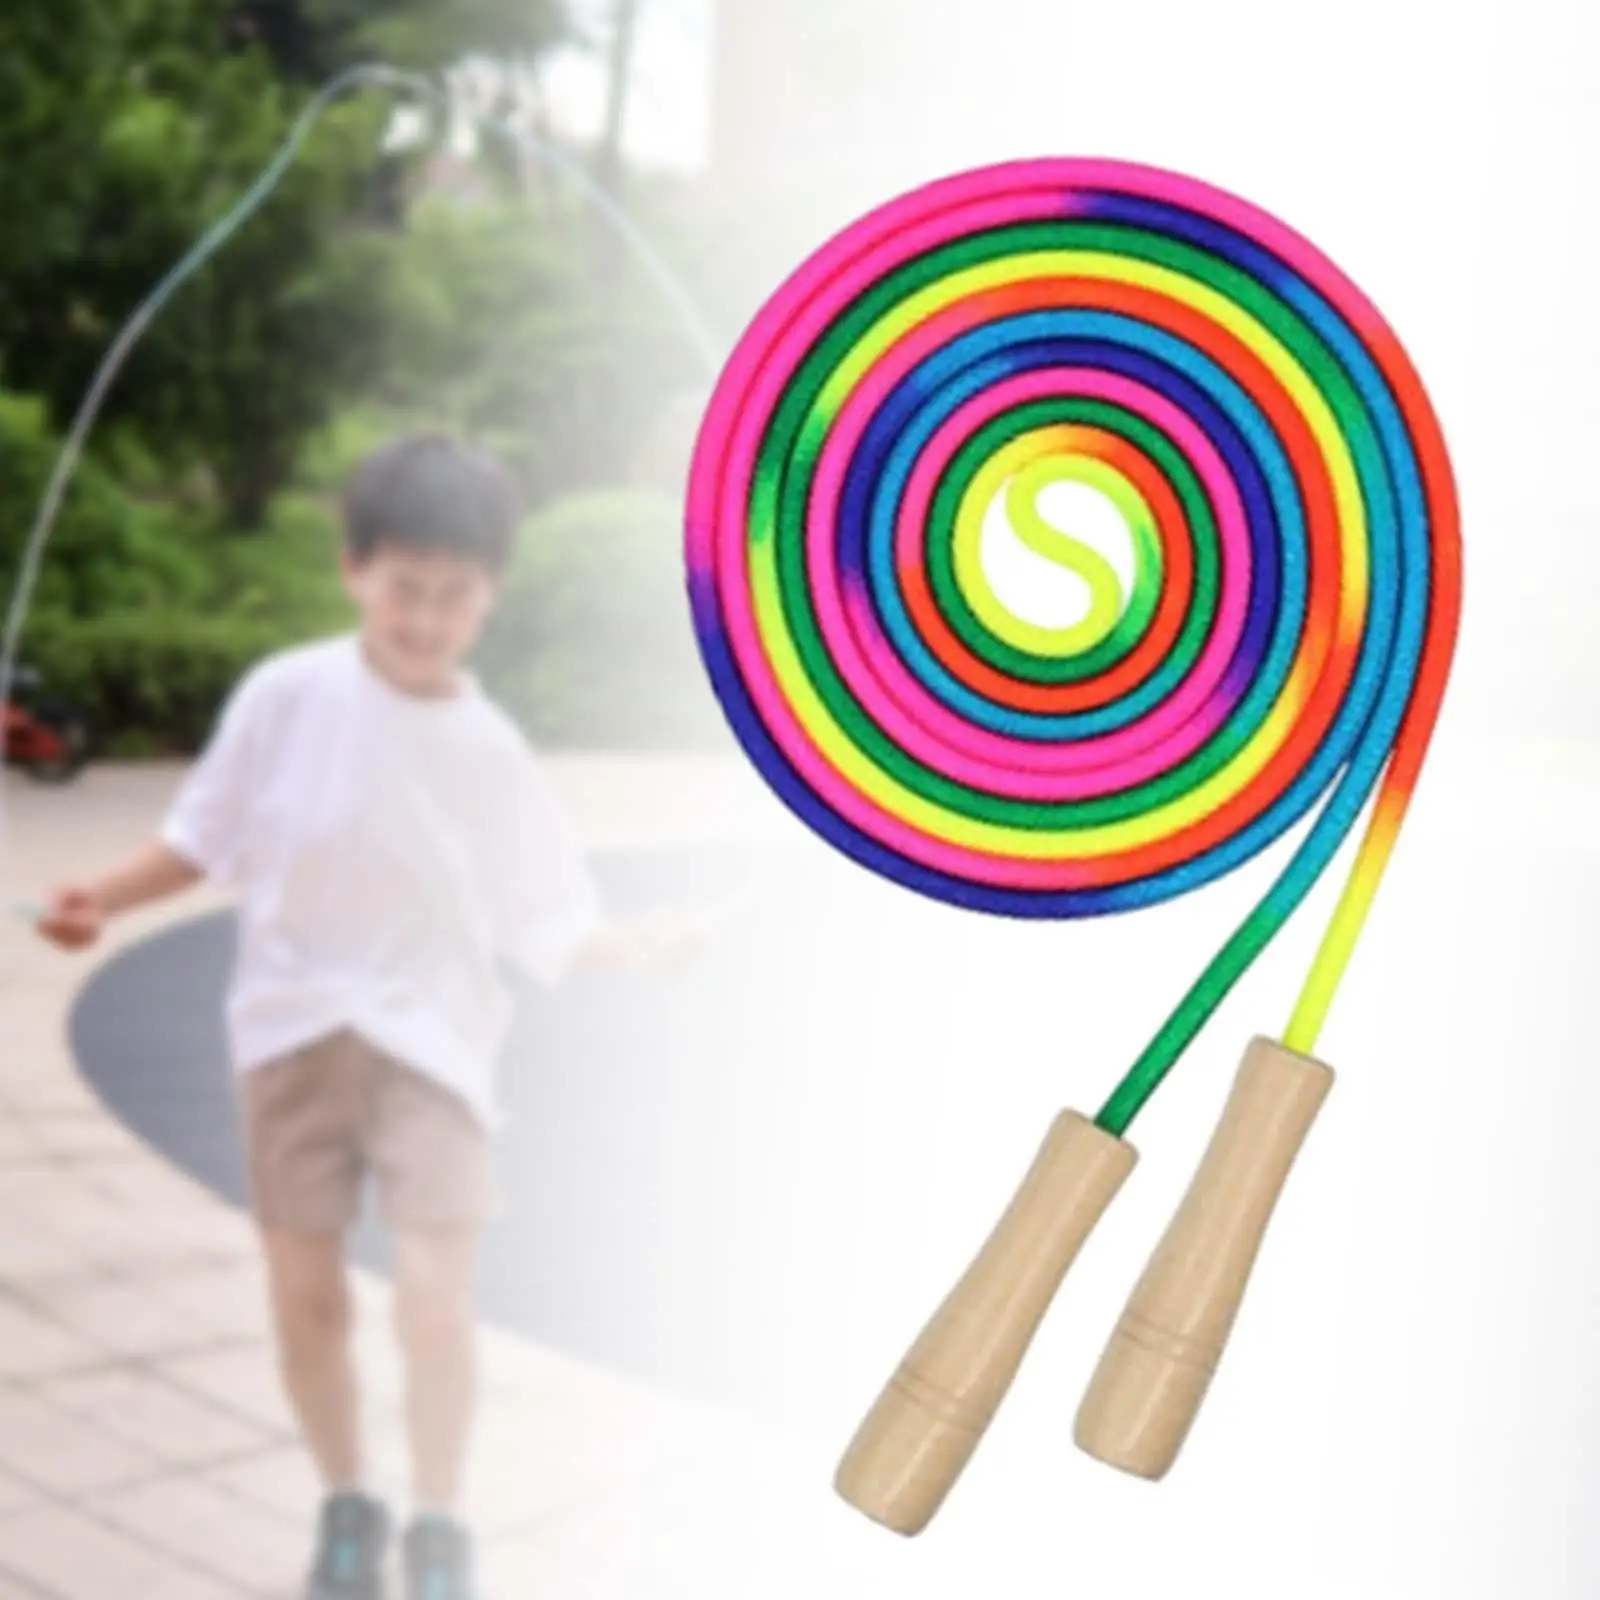 Skipping Rope for Boys Girls Fun Activities 2.8M Braided Rope Jump Rope for Outdoor Sports Home Gym Exercise Party Game Training